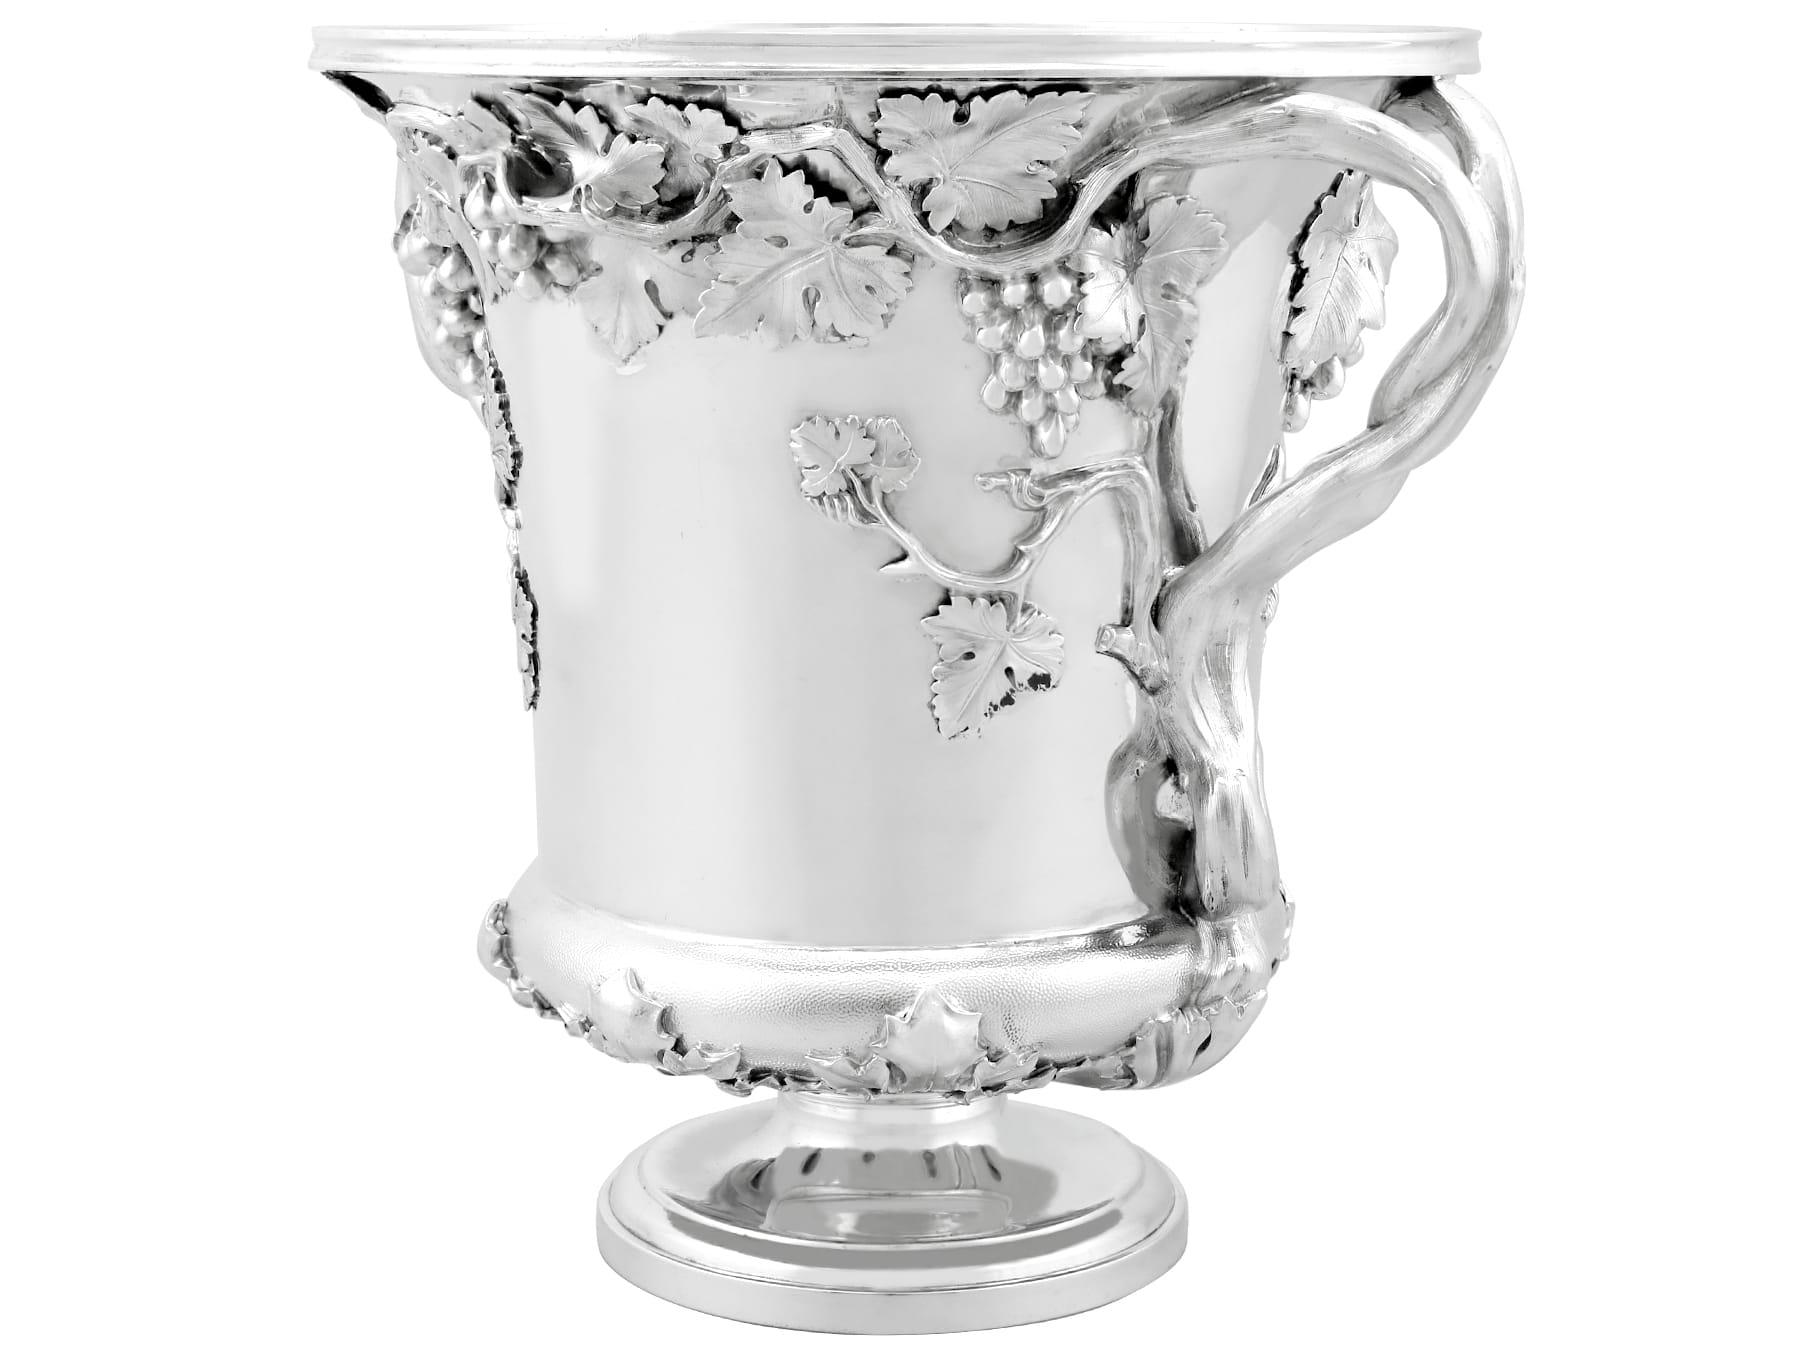 A magnificent, fine and impressive antique William IV English sterling silver wine cooler made by William Bateman II; an addition to our antique wine and drink related silverware collection

This magnificent antique William IV sterling silver wine